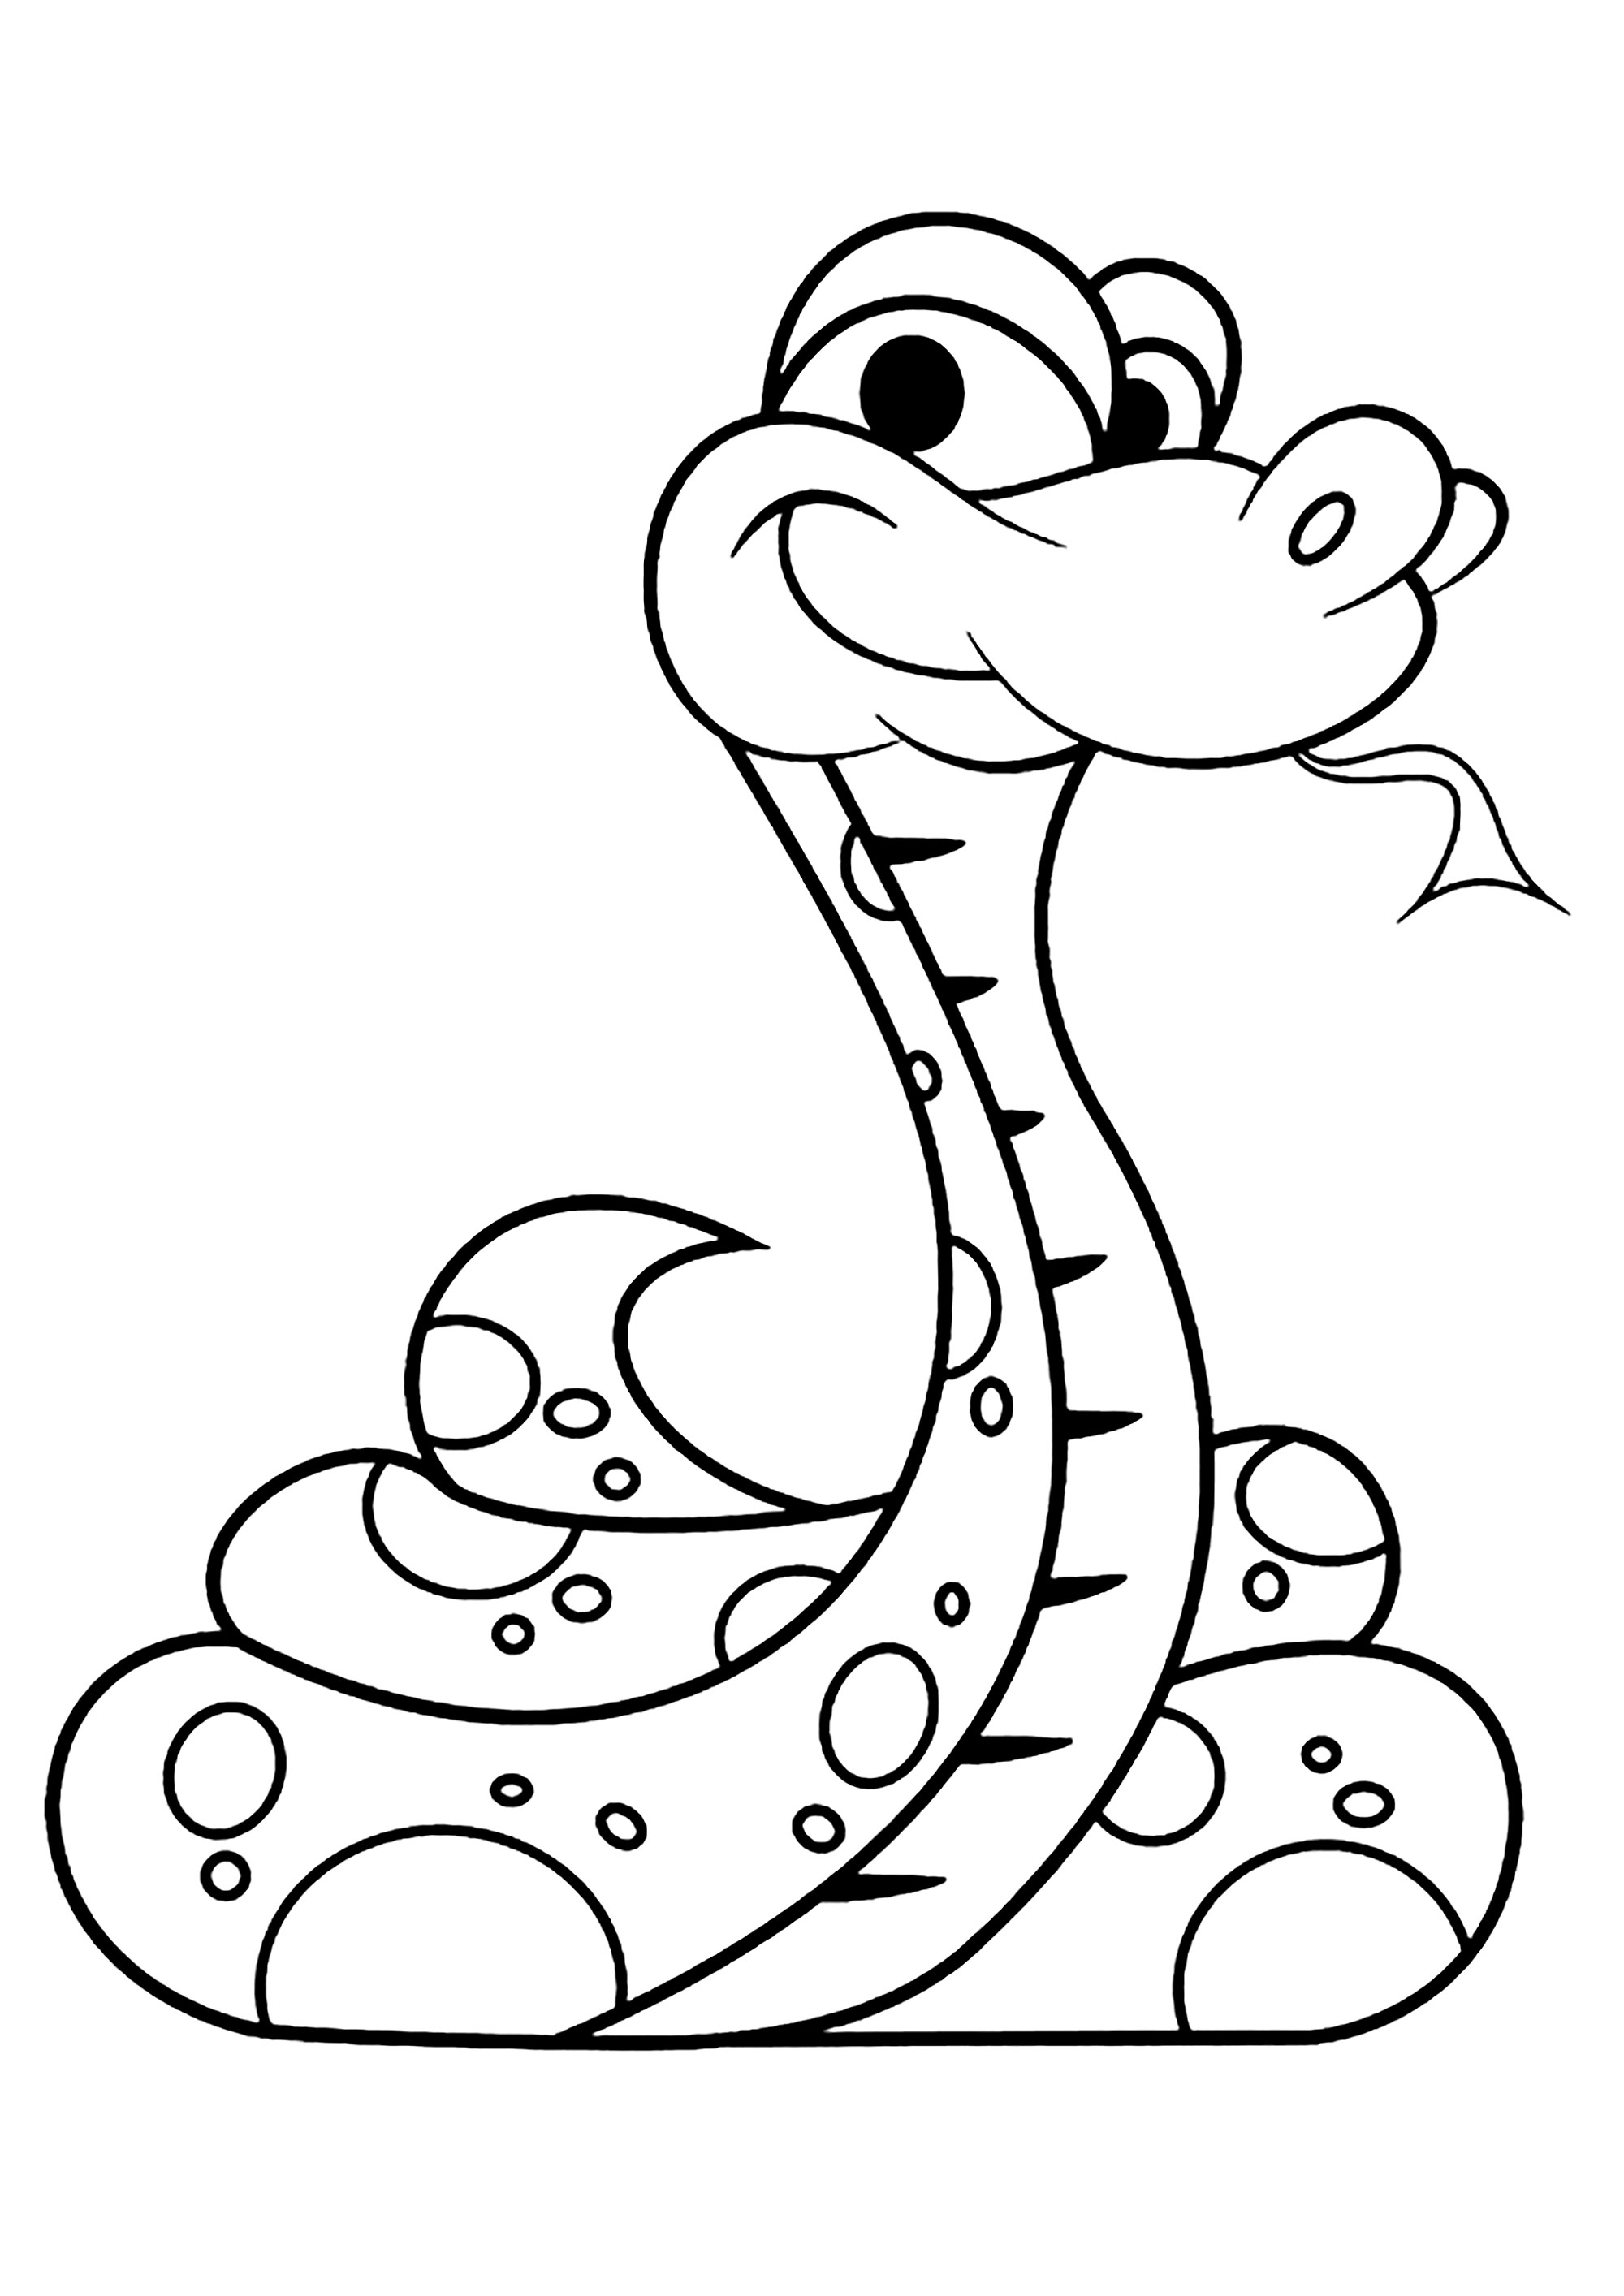 Simple Snakes coloring page to print and color for free